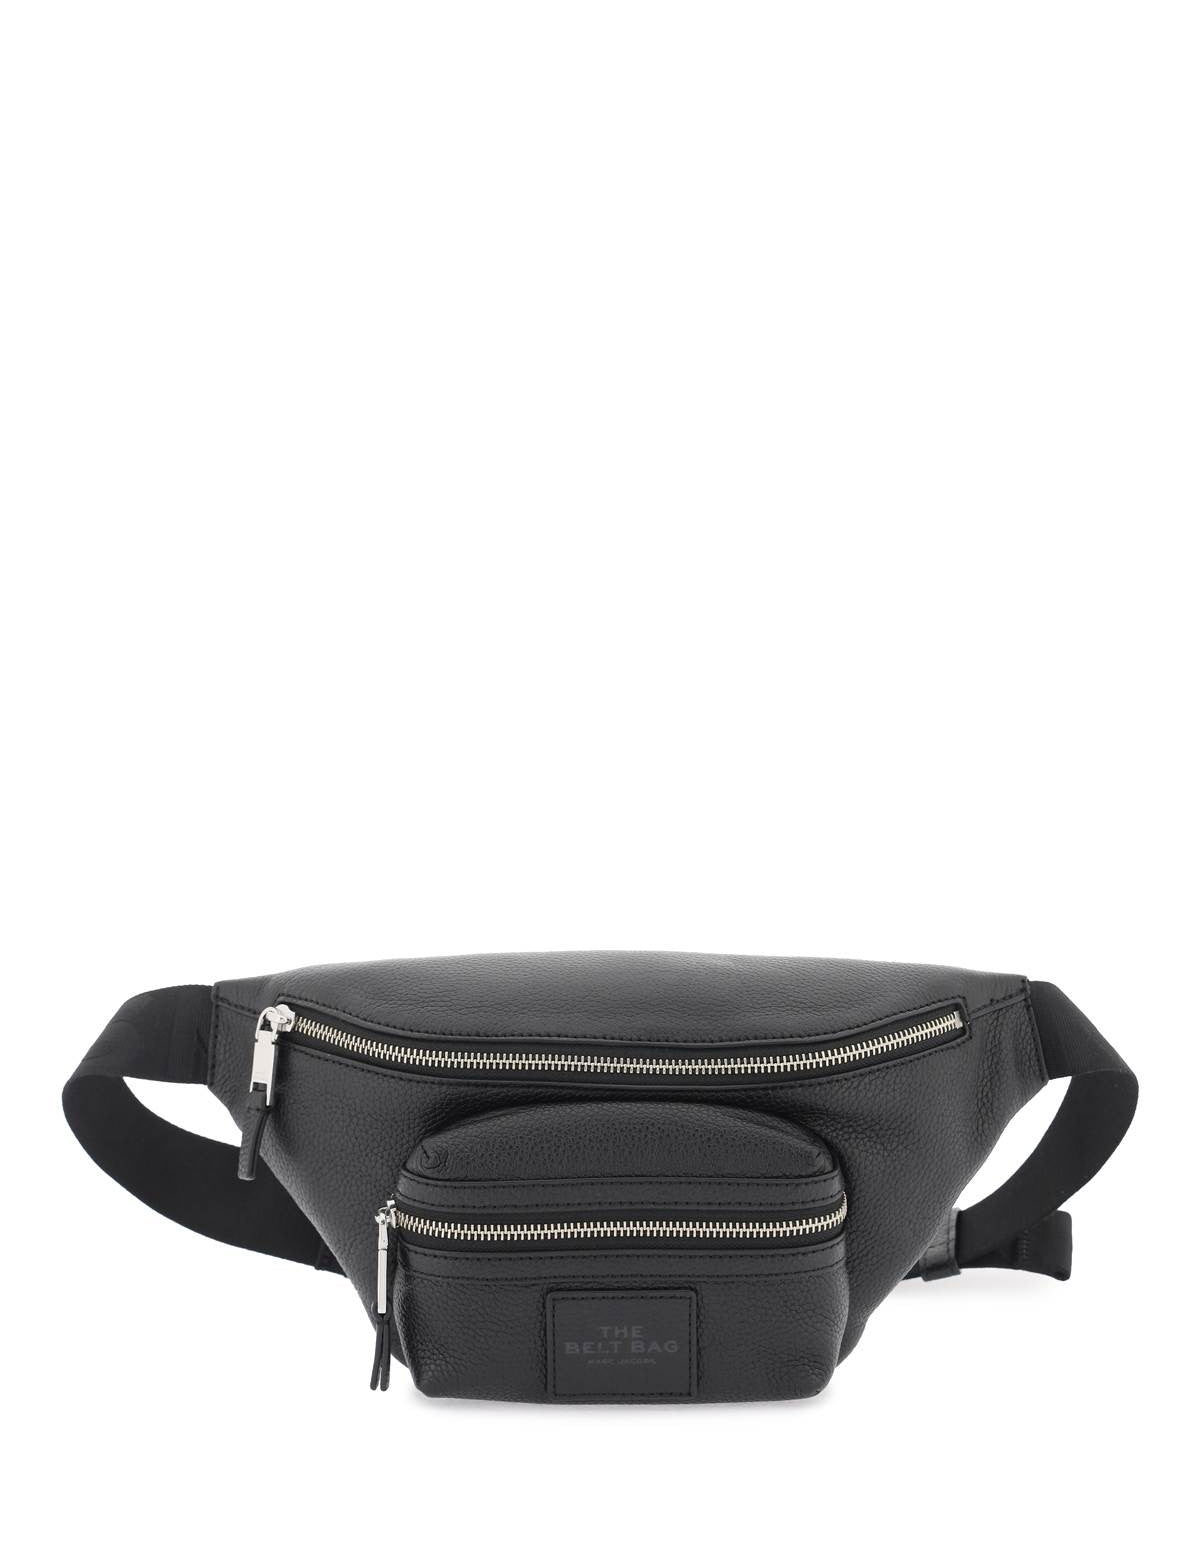 marc-jacobs-leather-belt-bag-the-perfect.jpg